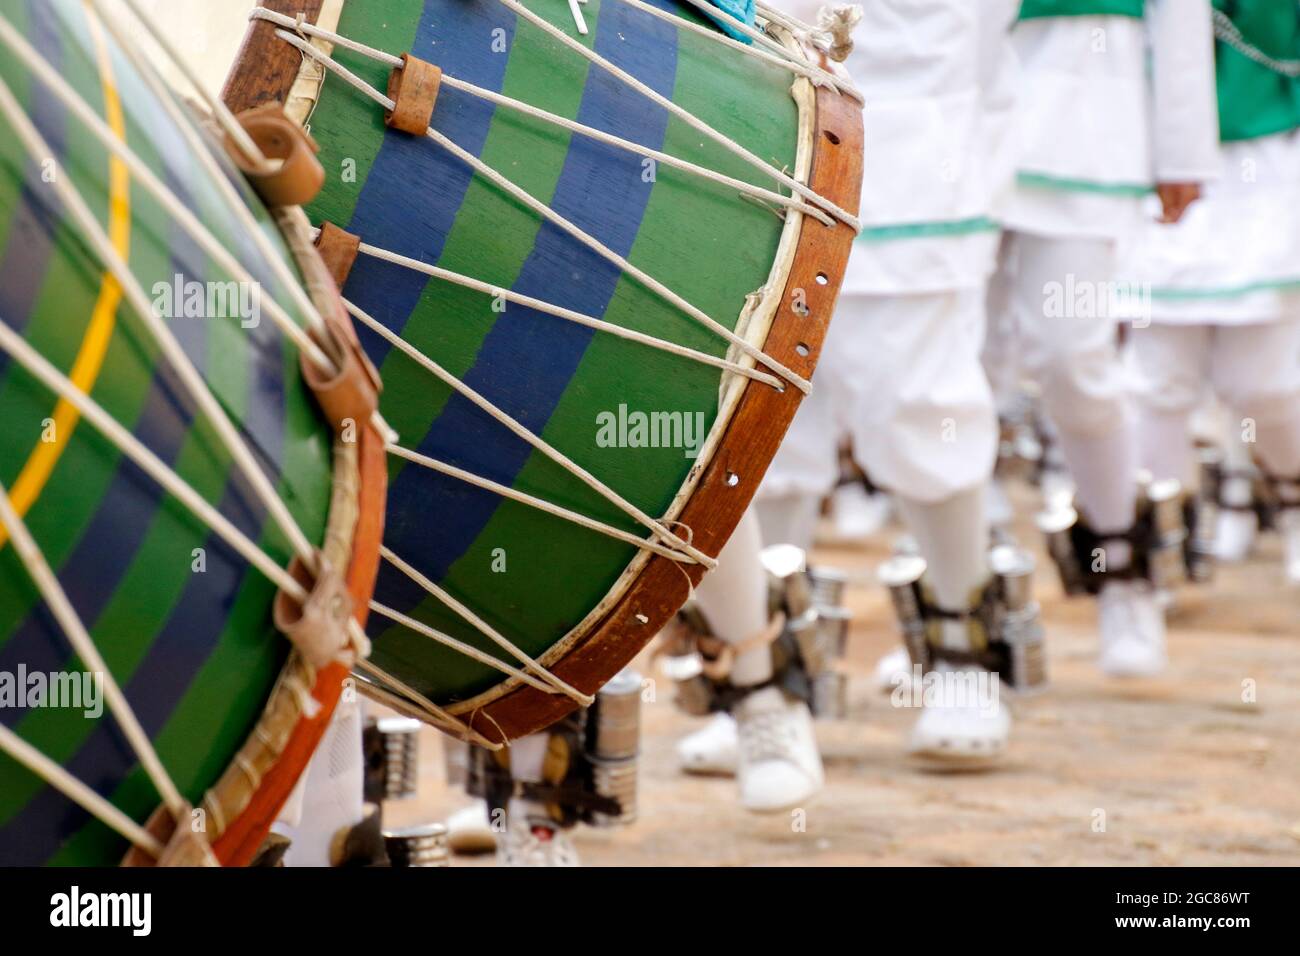 Oliveira, Minas Gerais, Brazil - August 8, 2018: detail of percussive instruments characteristic of the rosary festival Stock Photo